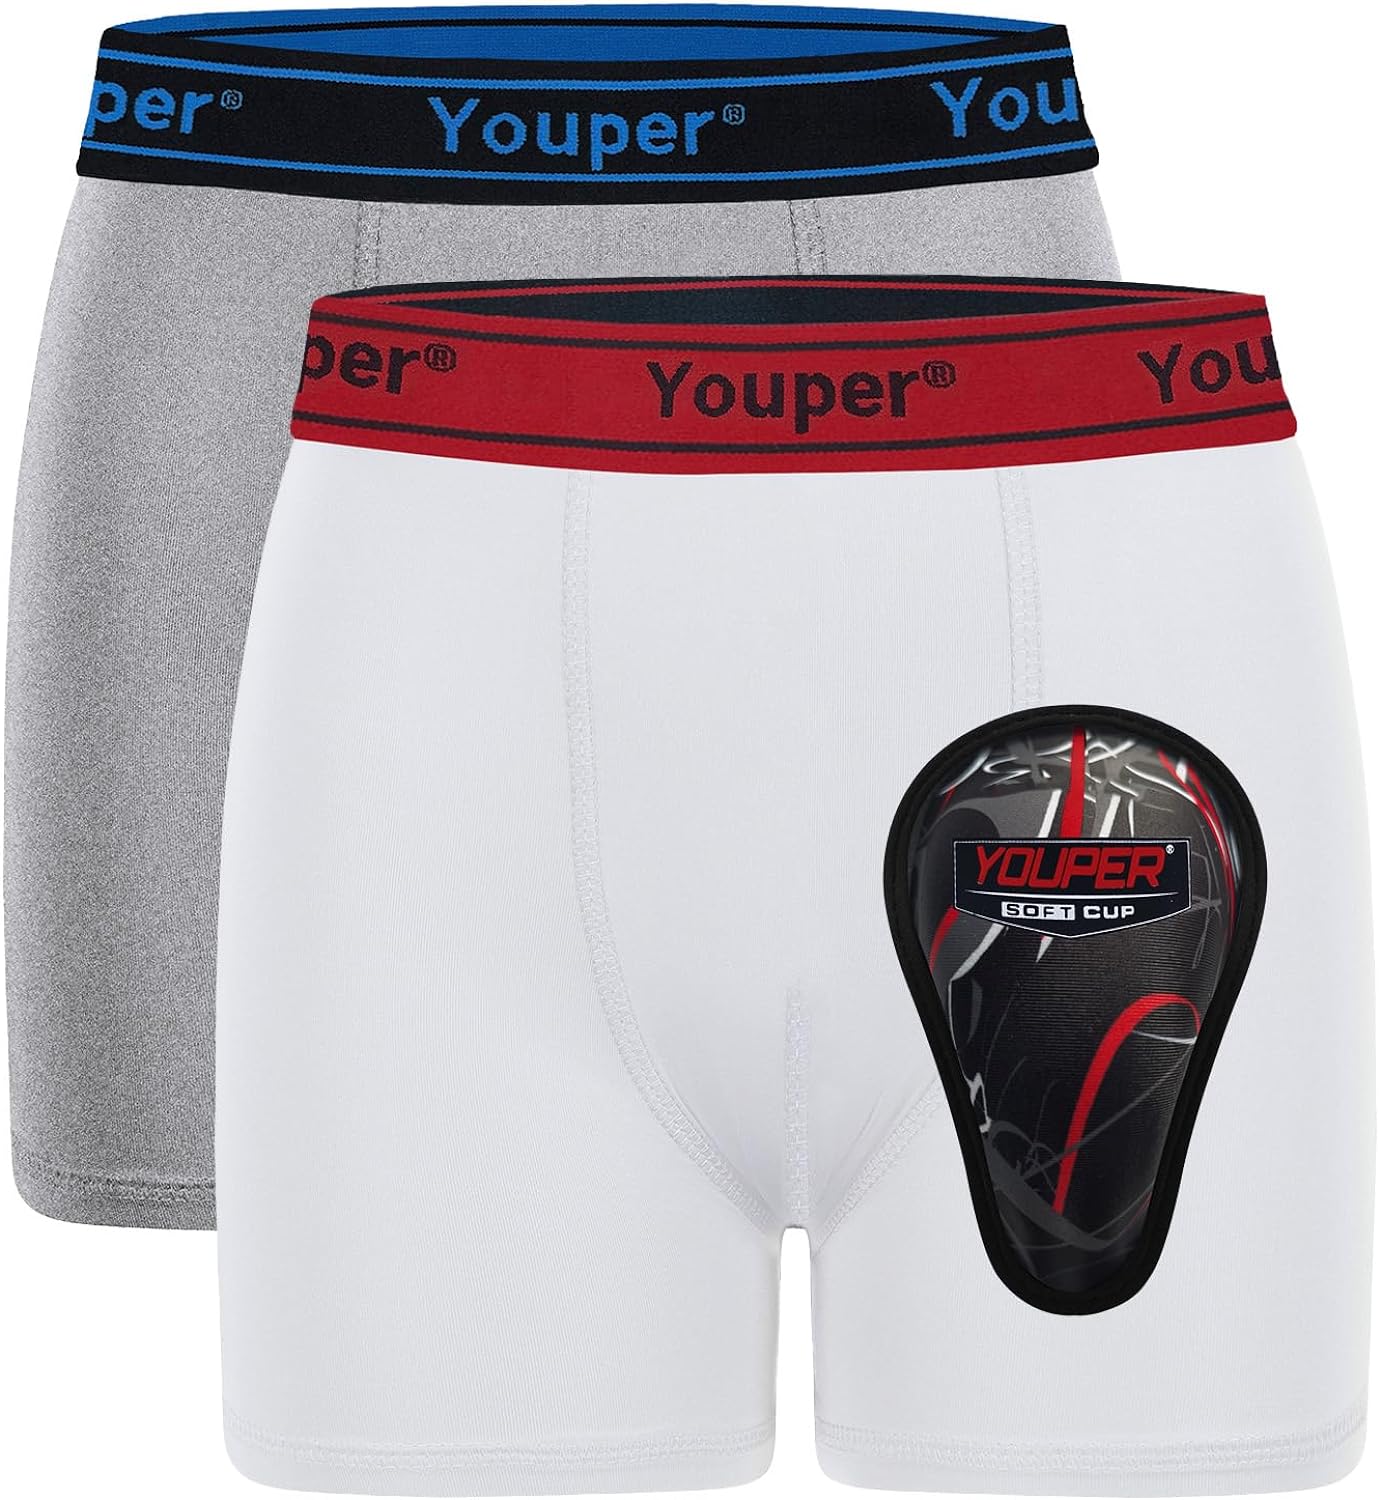 Buy YouperBoys Athletic Supporter, Compression Shorts w/Soft